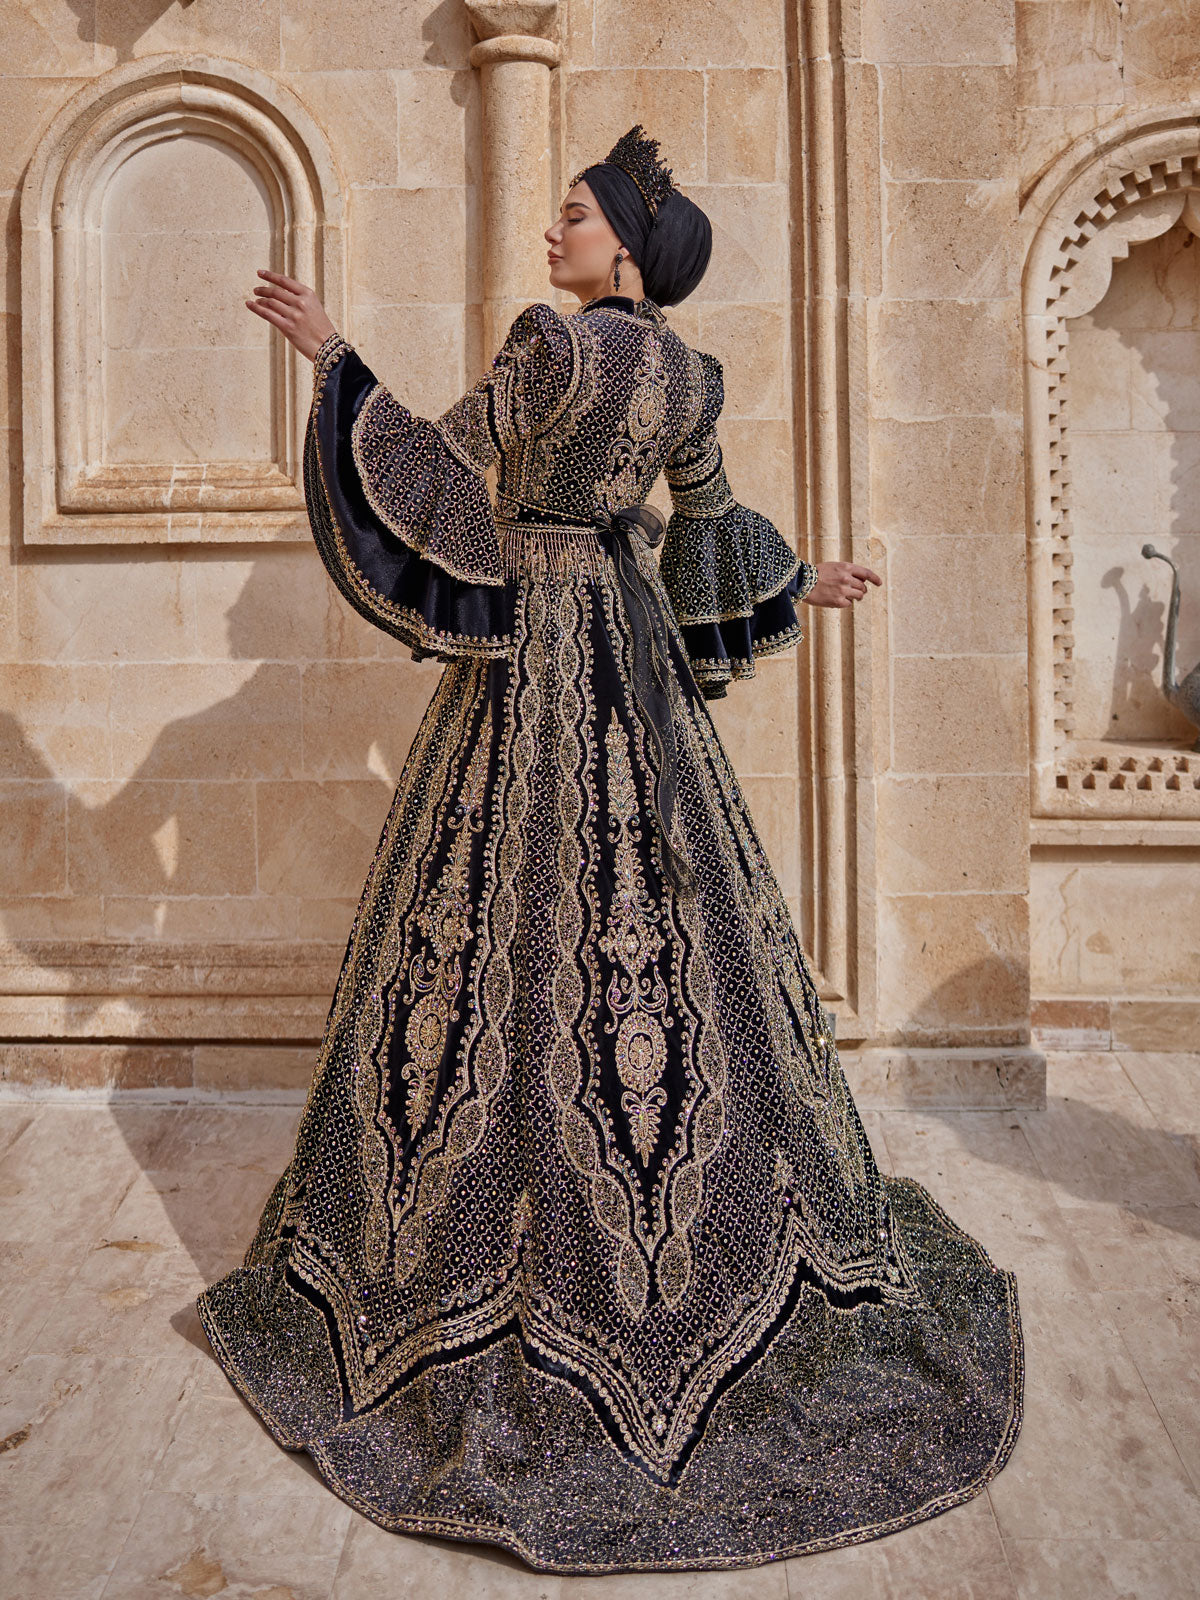 buy heavy embroidered gold sequins embellished elegant royal dubai arabic turkish henna kaftan gown with long embellished sleeve online henna dress boutiques with plus sizes